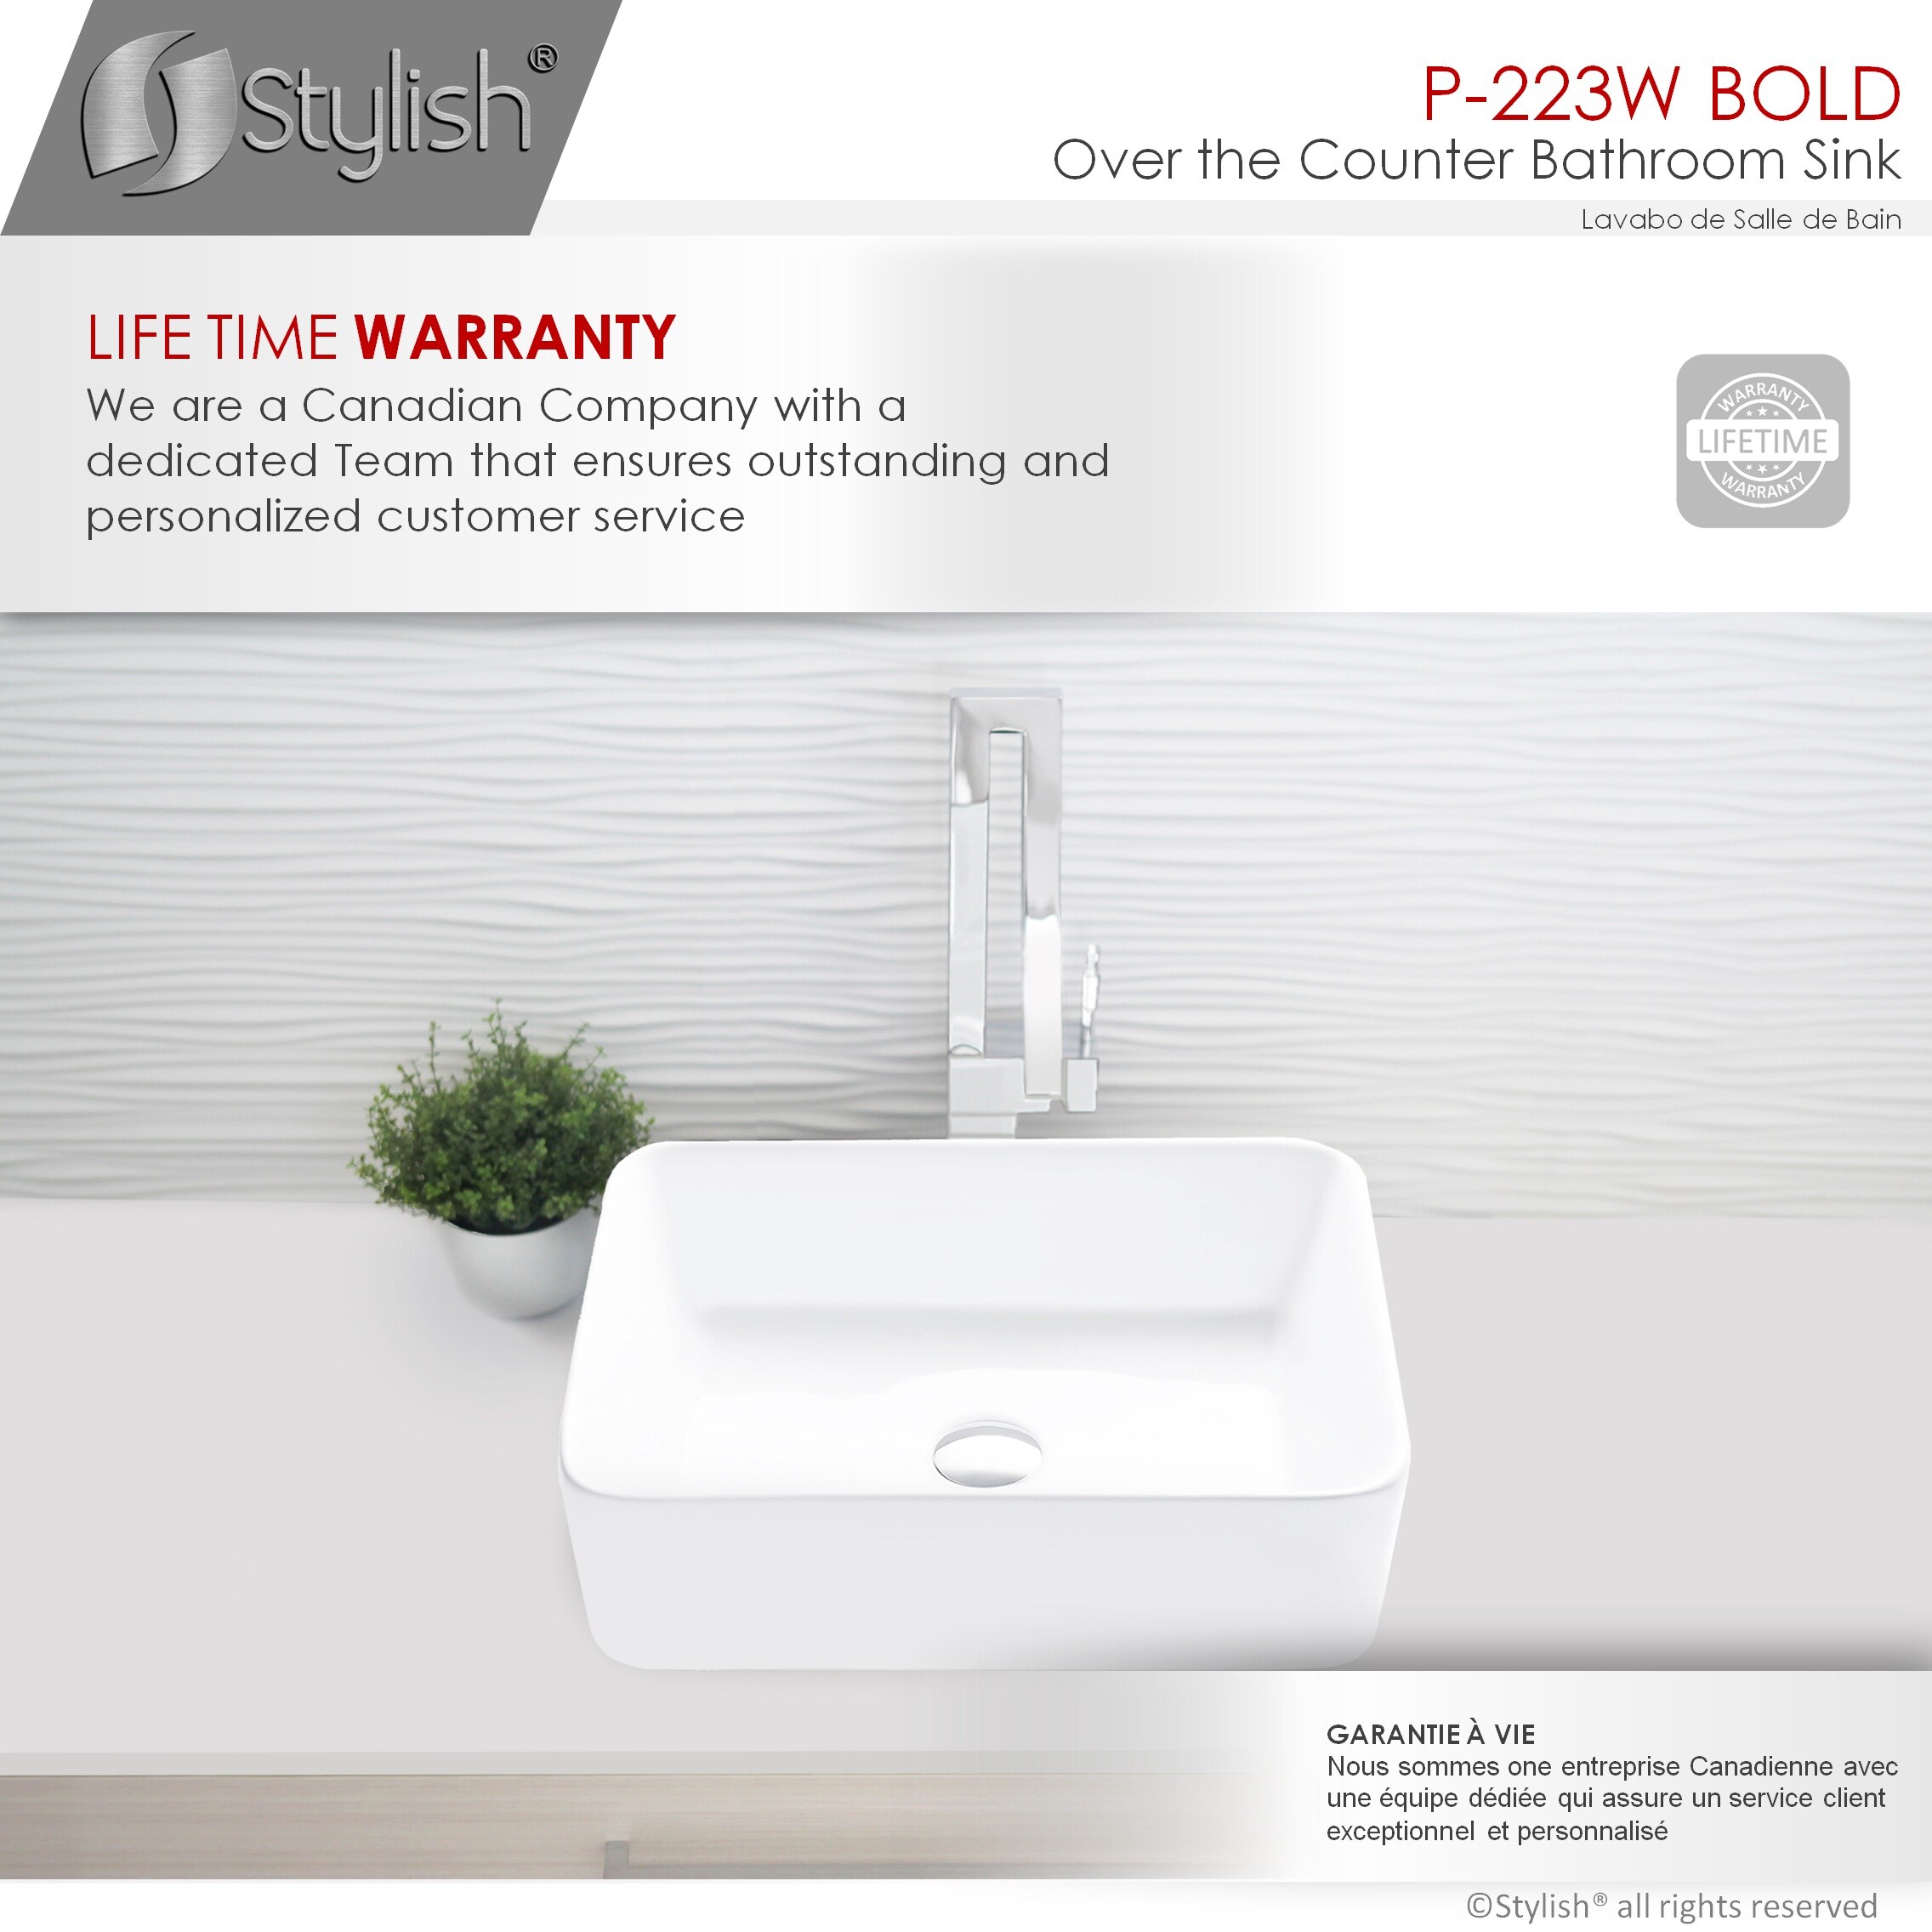 P-223 Fine Porcelain Vessel Sinks with Enamel Glaze Finish STYLISH® Rectangular Bathroom Over The Counter Sinks Smooth & Stain Resistant Surface Compliment The Bathroom Change Décor